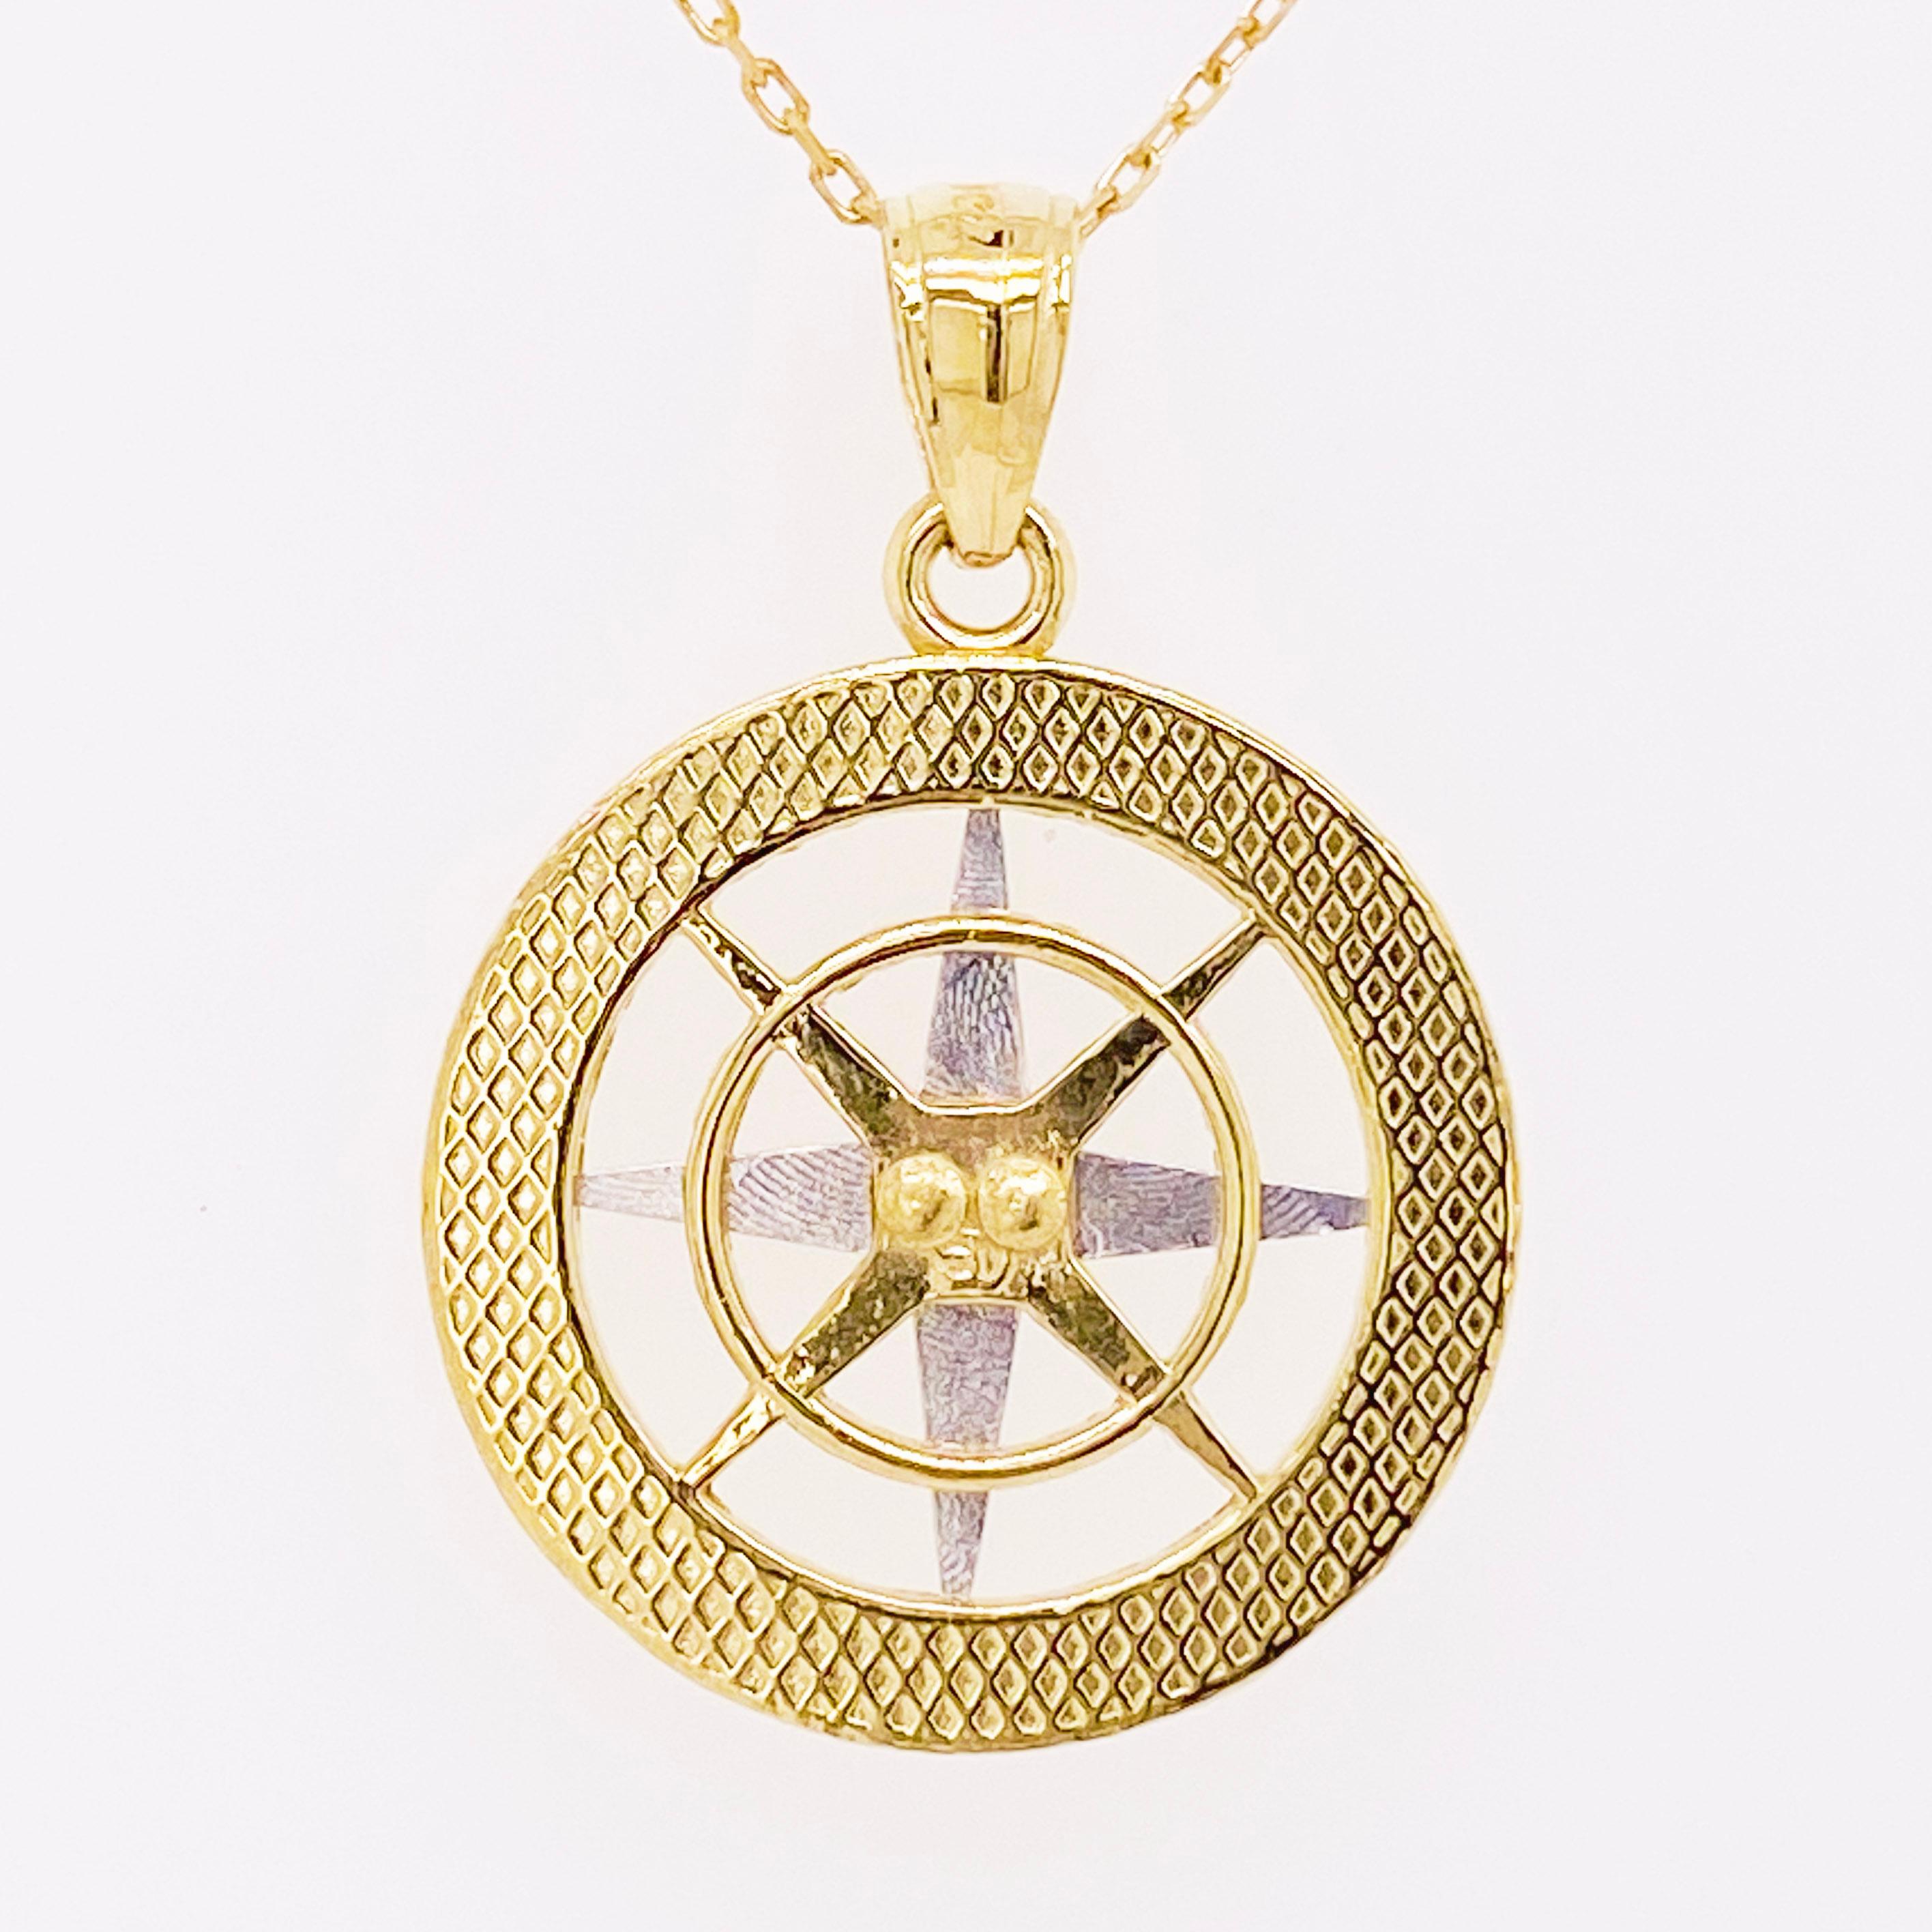 Modern Gold Compass Necklace, 14 Karat Yellow White Gold, Journey to Follow Your Heart